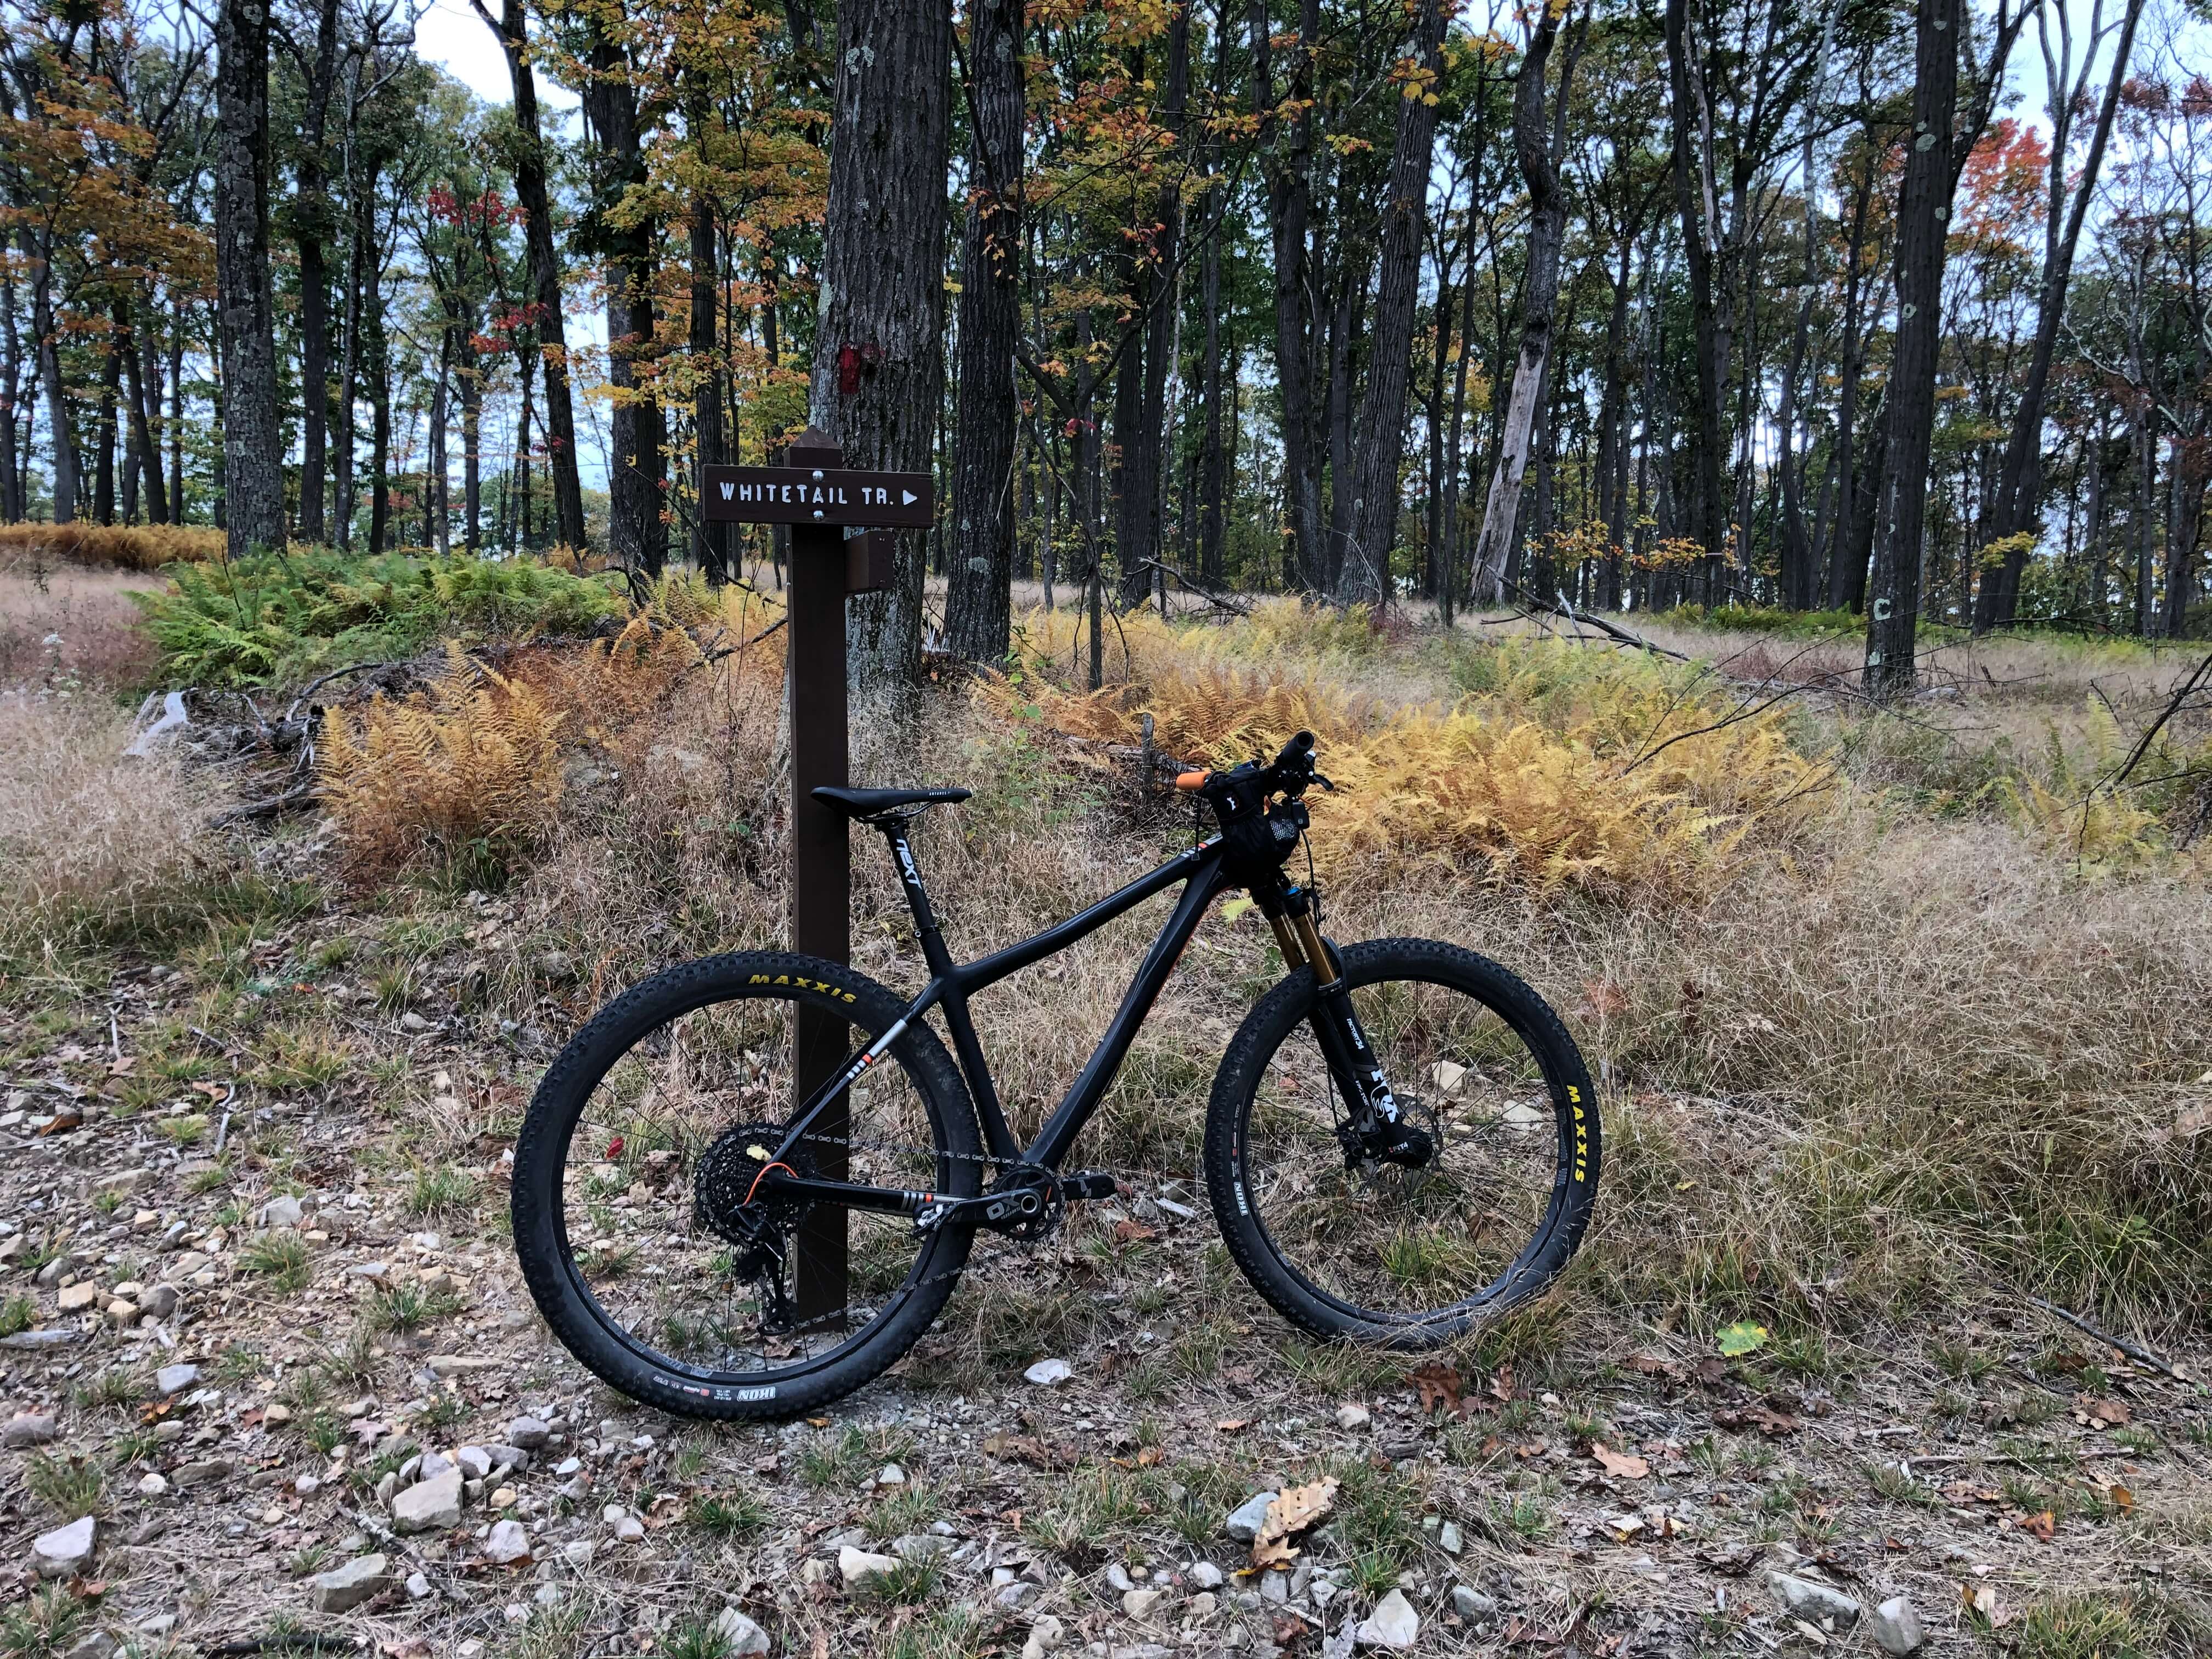 Laurel Highlands Gravel Routes Collection - Whitetail Trail